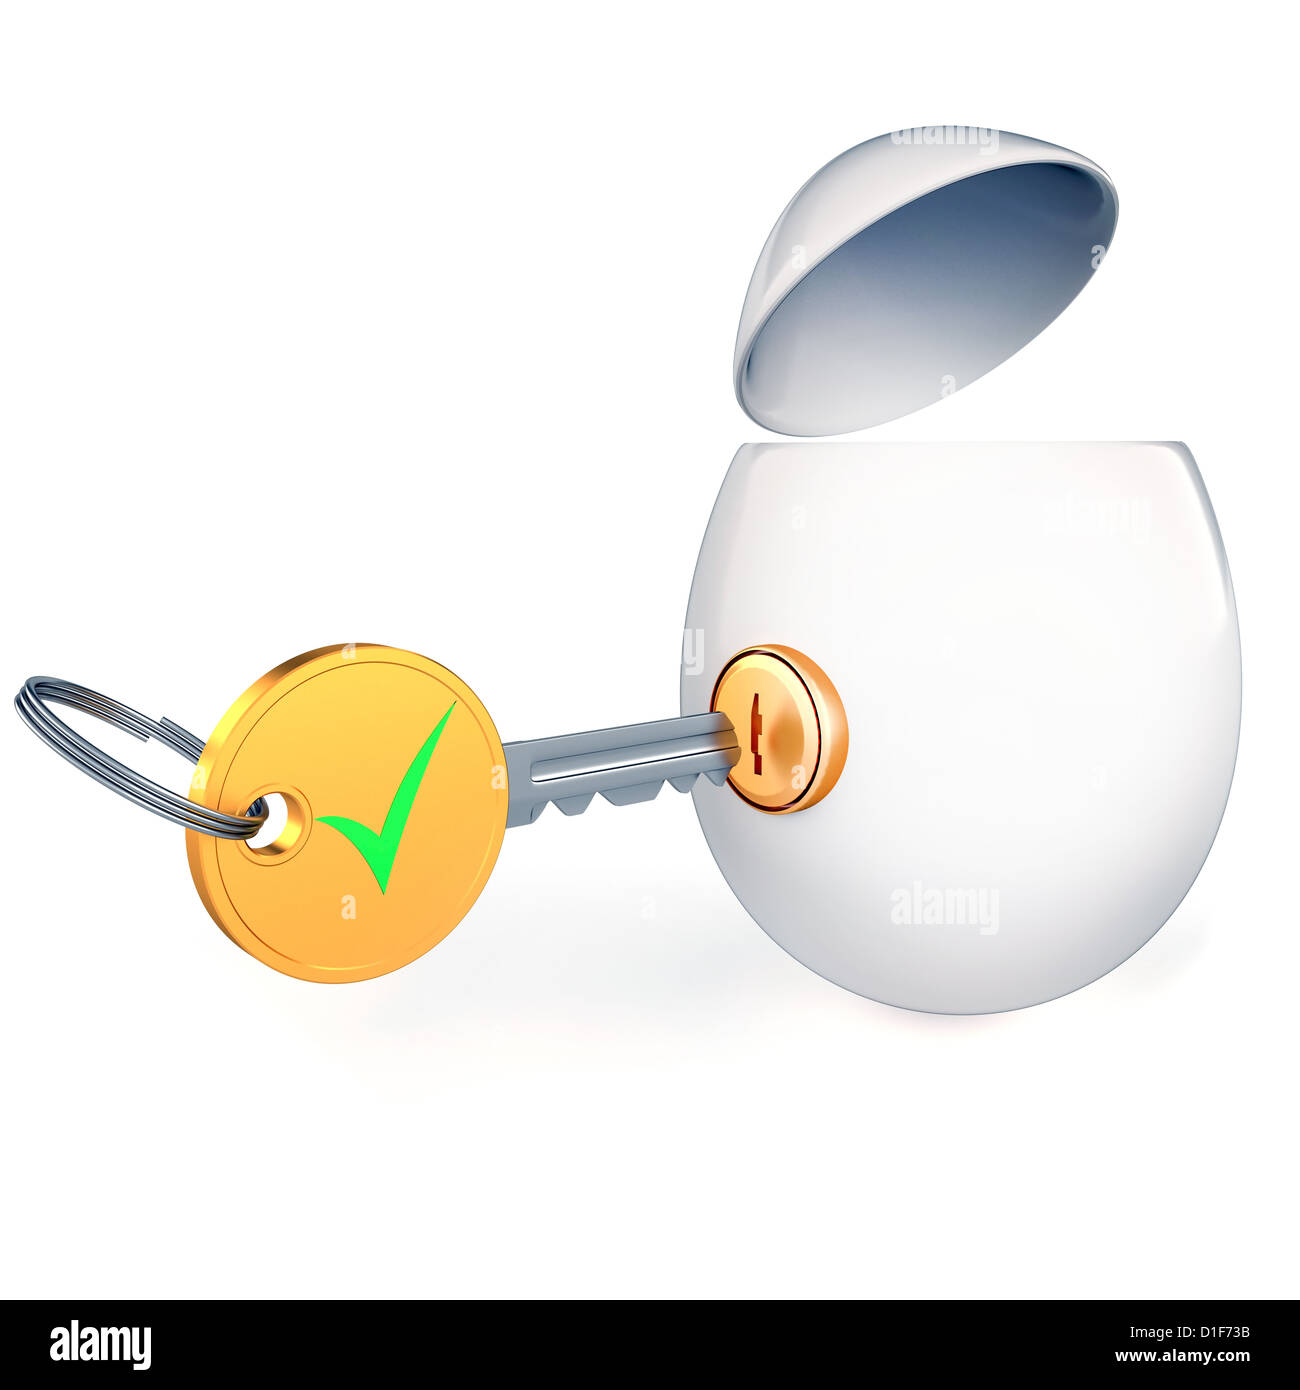 Egg and key, accept sign Stock Photo